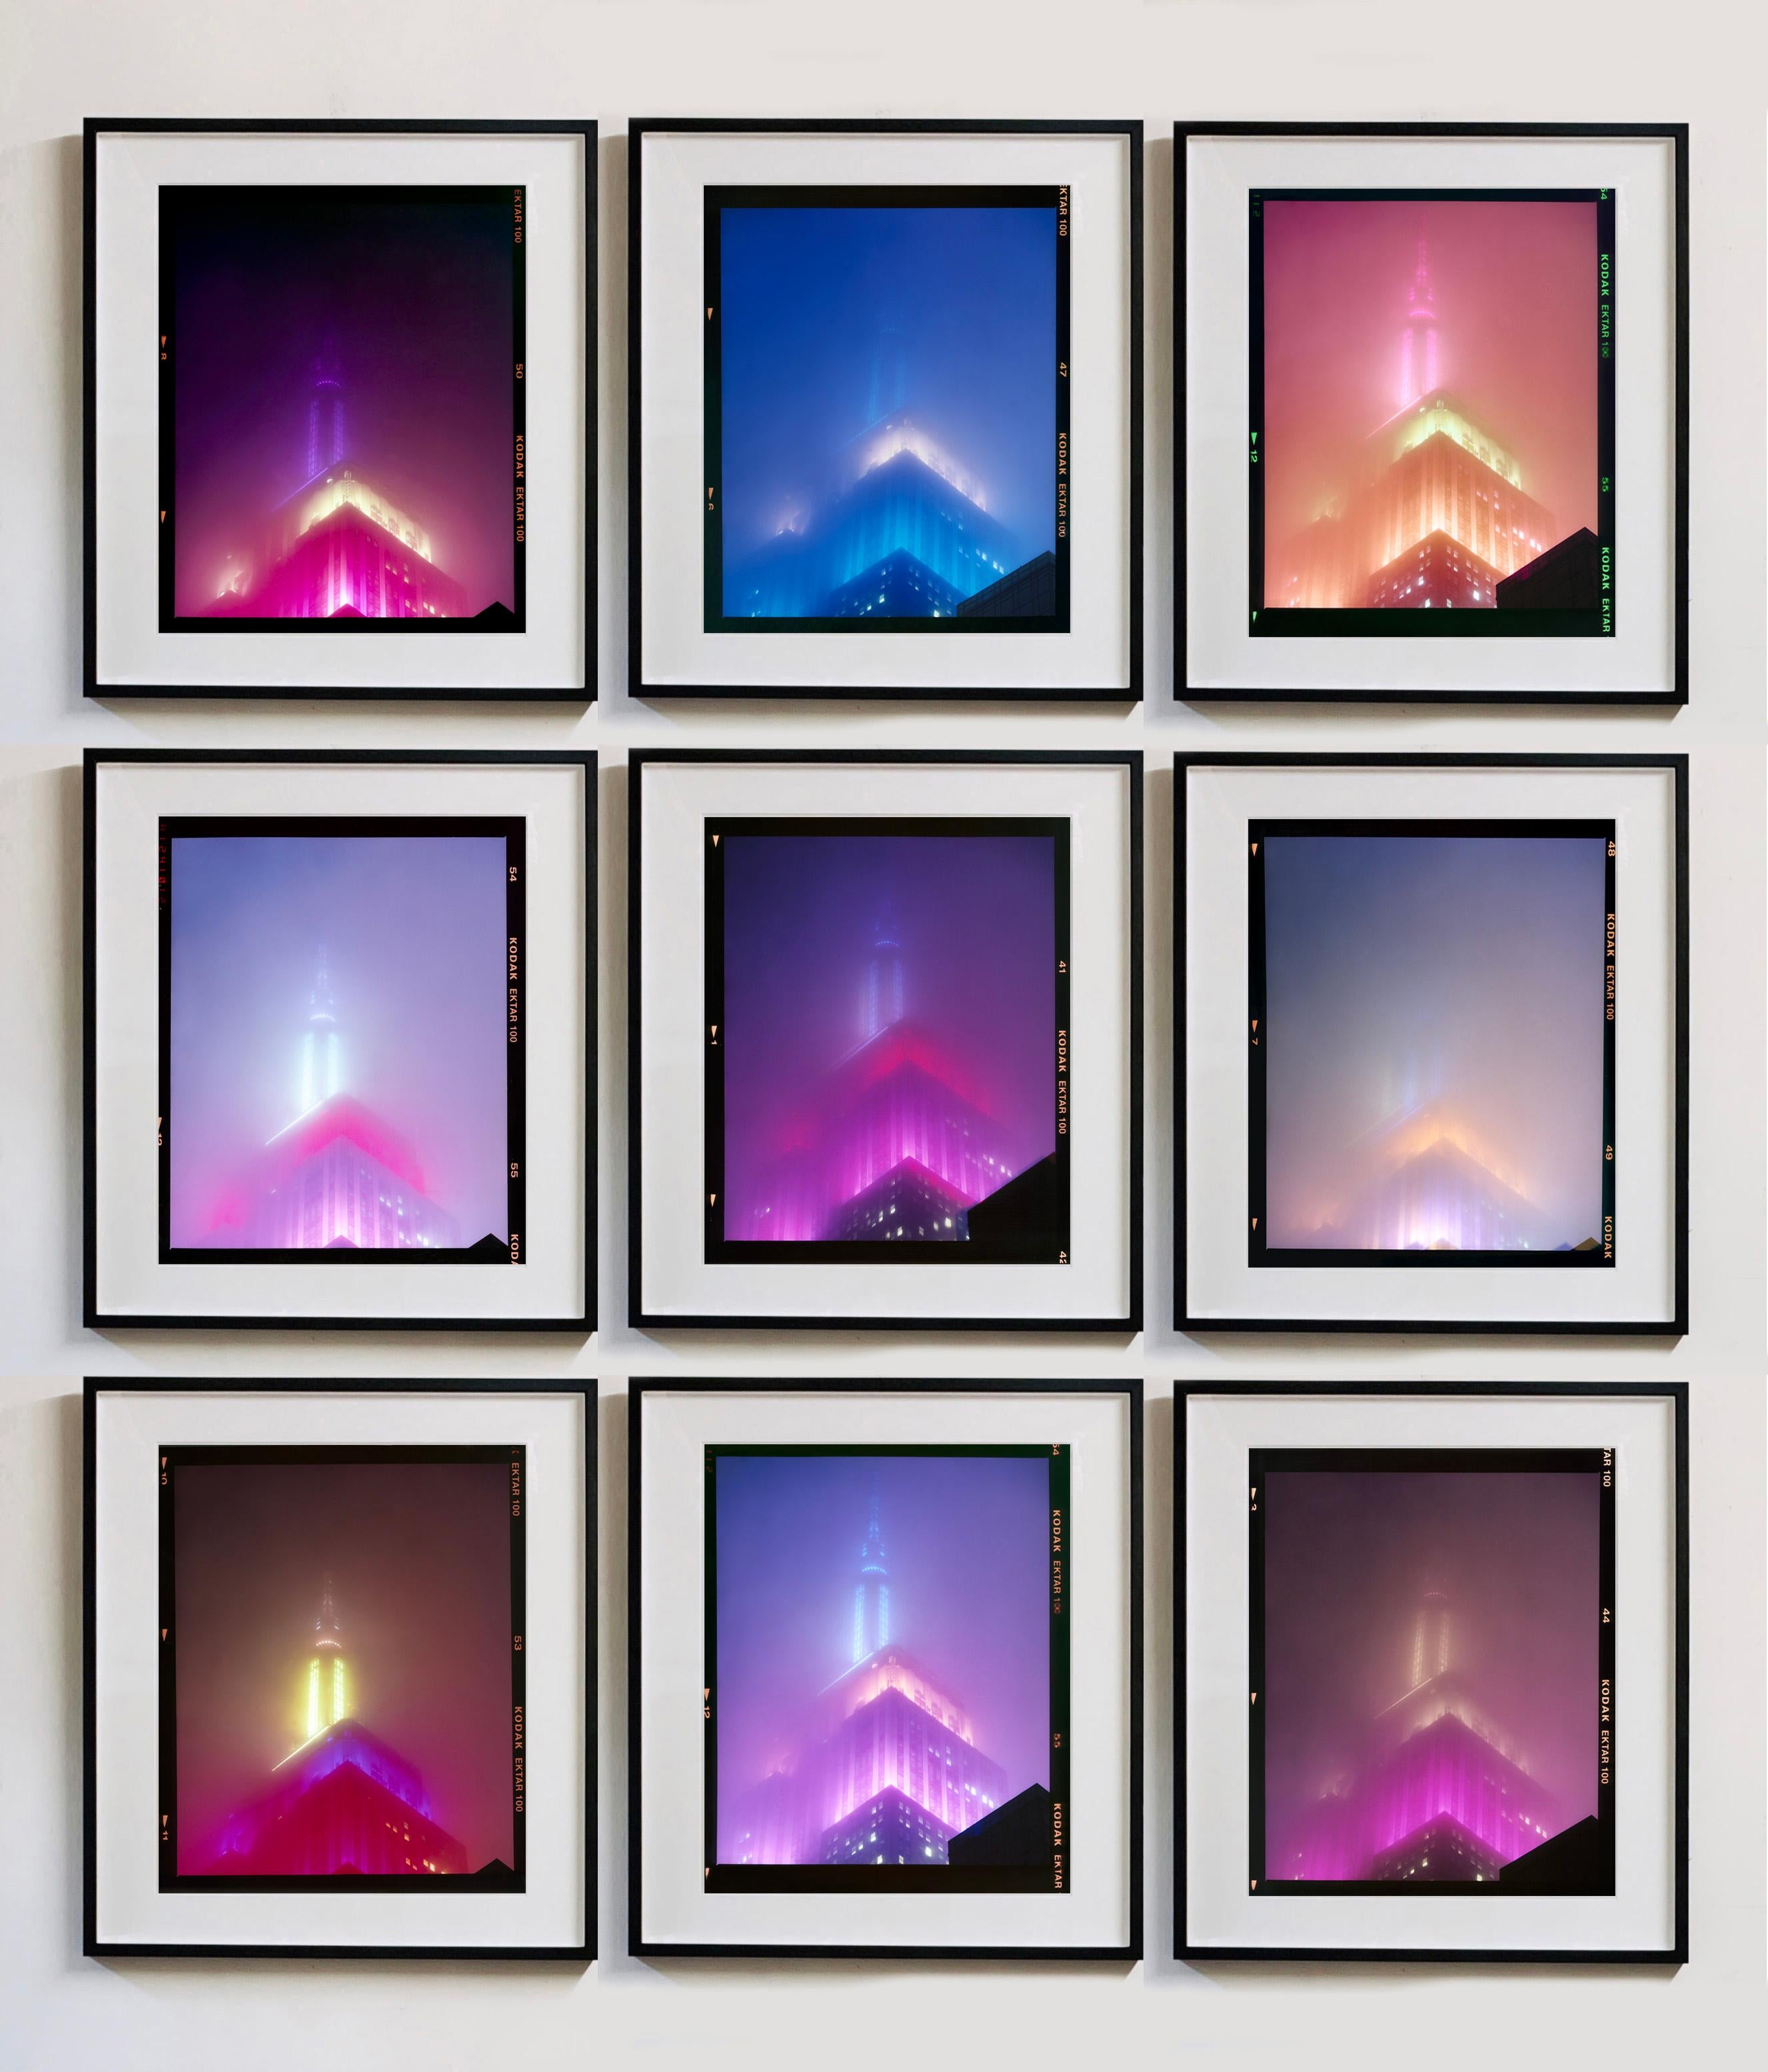 'NOMAD II (Film Rebate)', New York. Richard Heeps has photographed the iconic Empire State building in the mist. The NOMAD sequence of photographs capture the art deco architecture illuminated by changing colours, and is part of Richard's street